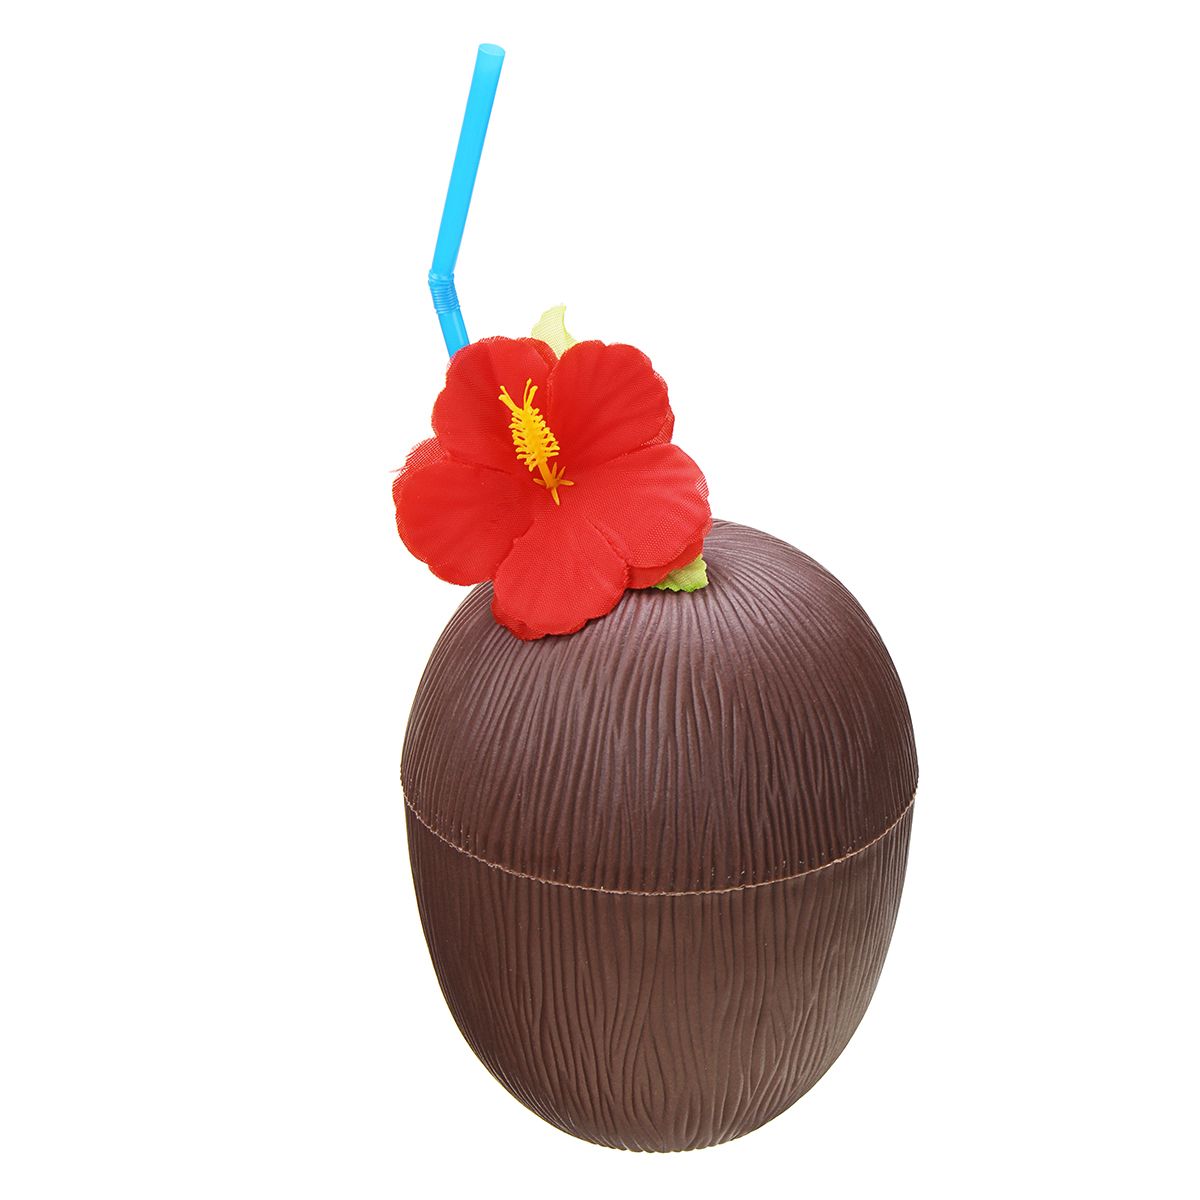 Plastic-Tropical-Coconut-Cup-Bottle-w-Straw-Summer-Hawaii-Luau-Party-Beach-Pool-Party-1374247